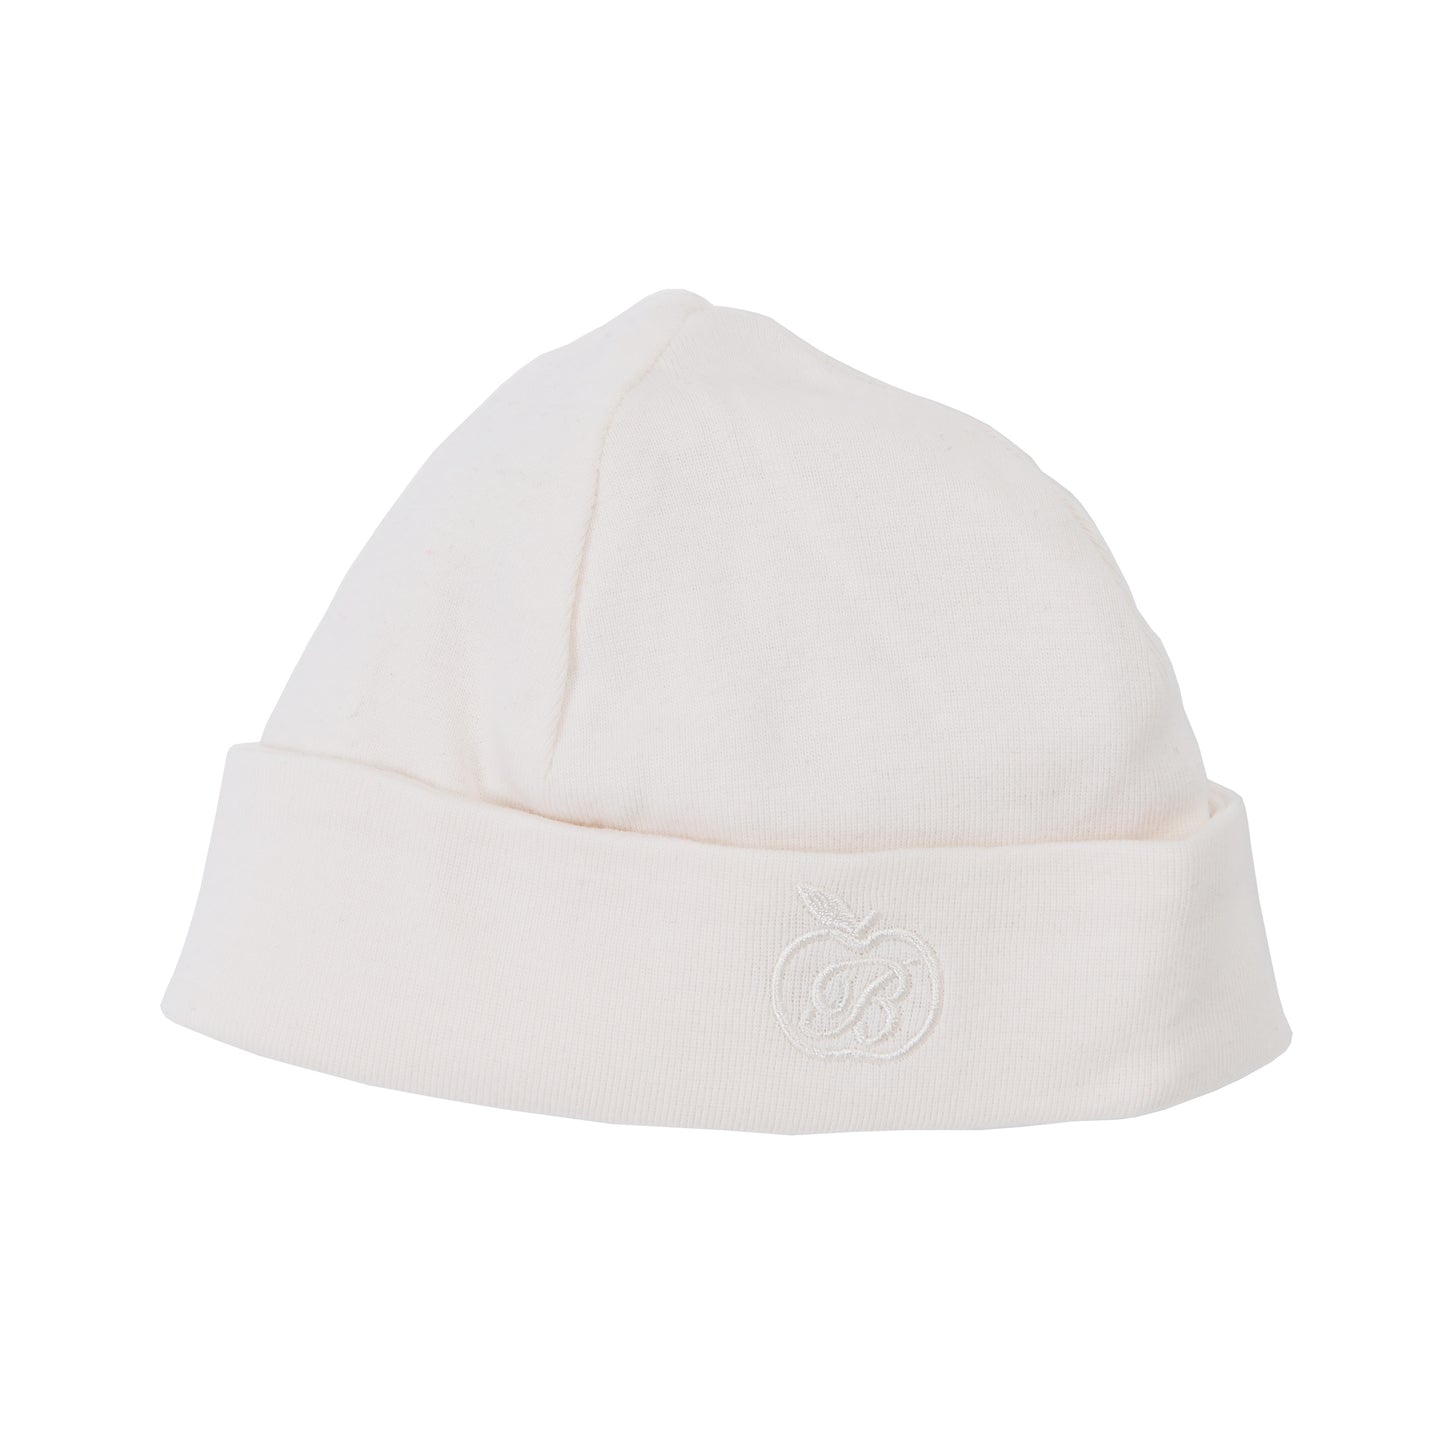 HAT - BABY - CREME - BILLY